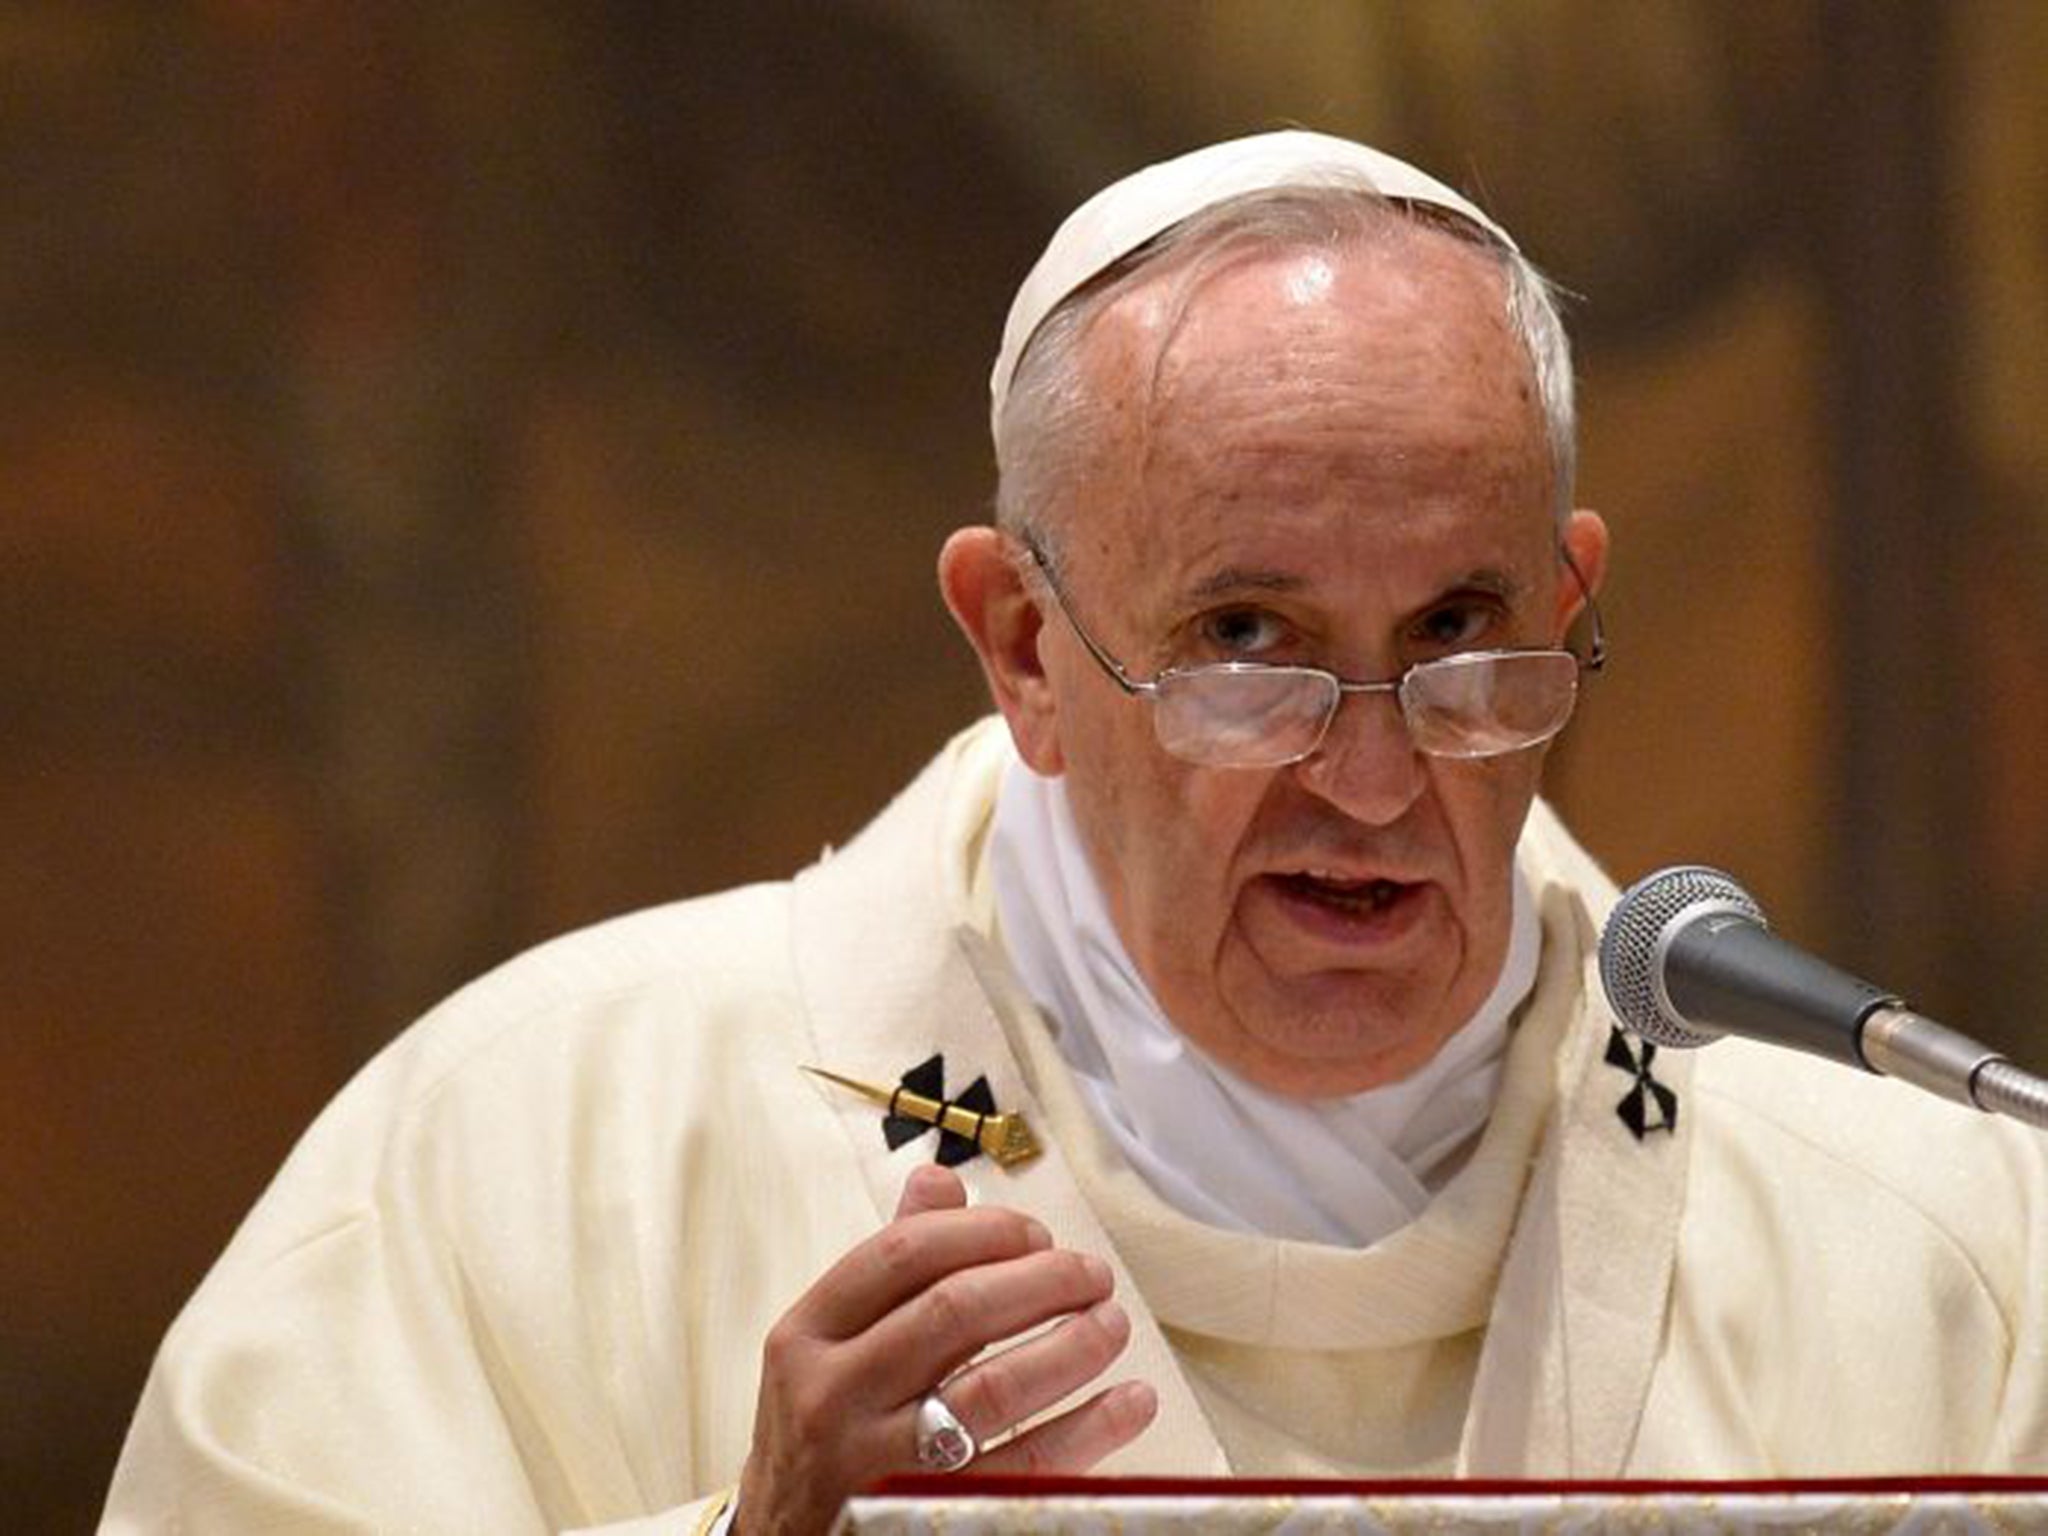 Pope Francis is due make an encyclical about link between climate change and poverty